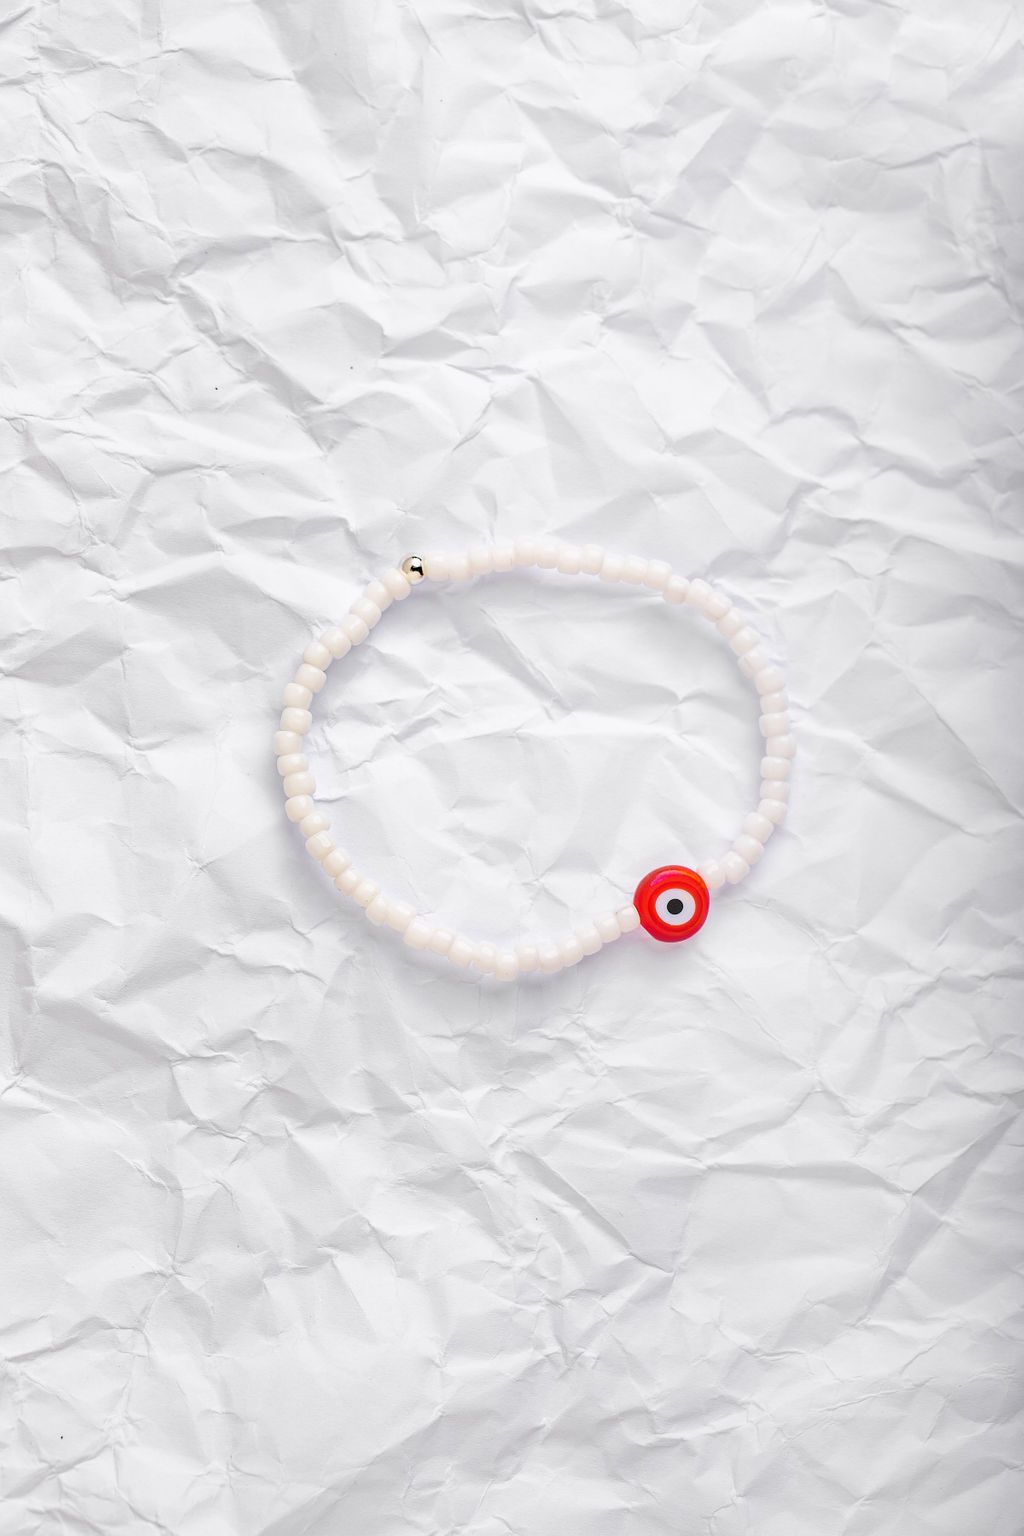 White Japanese glass beads on sturdy elastic. For that little pop of color and protection for your personal space bubble. Wear just one or stack 'em.